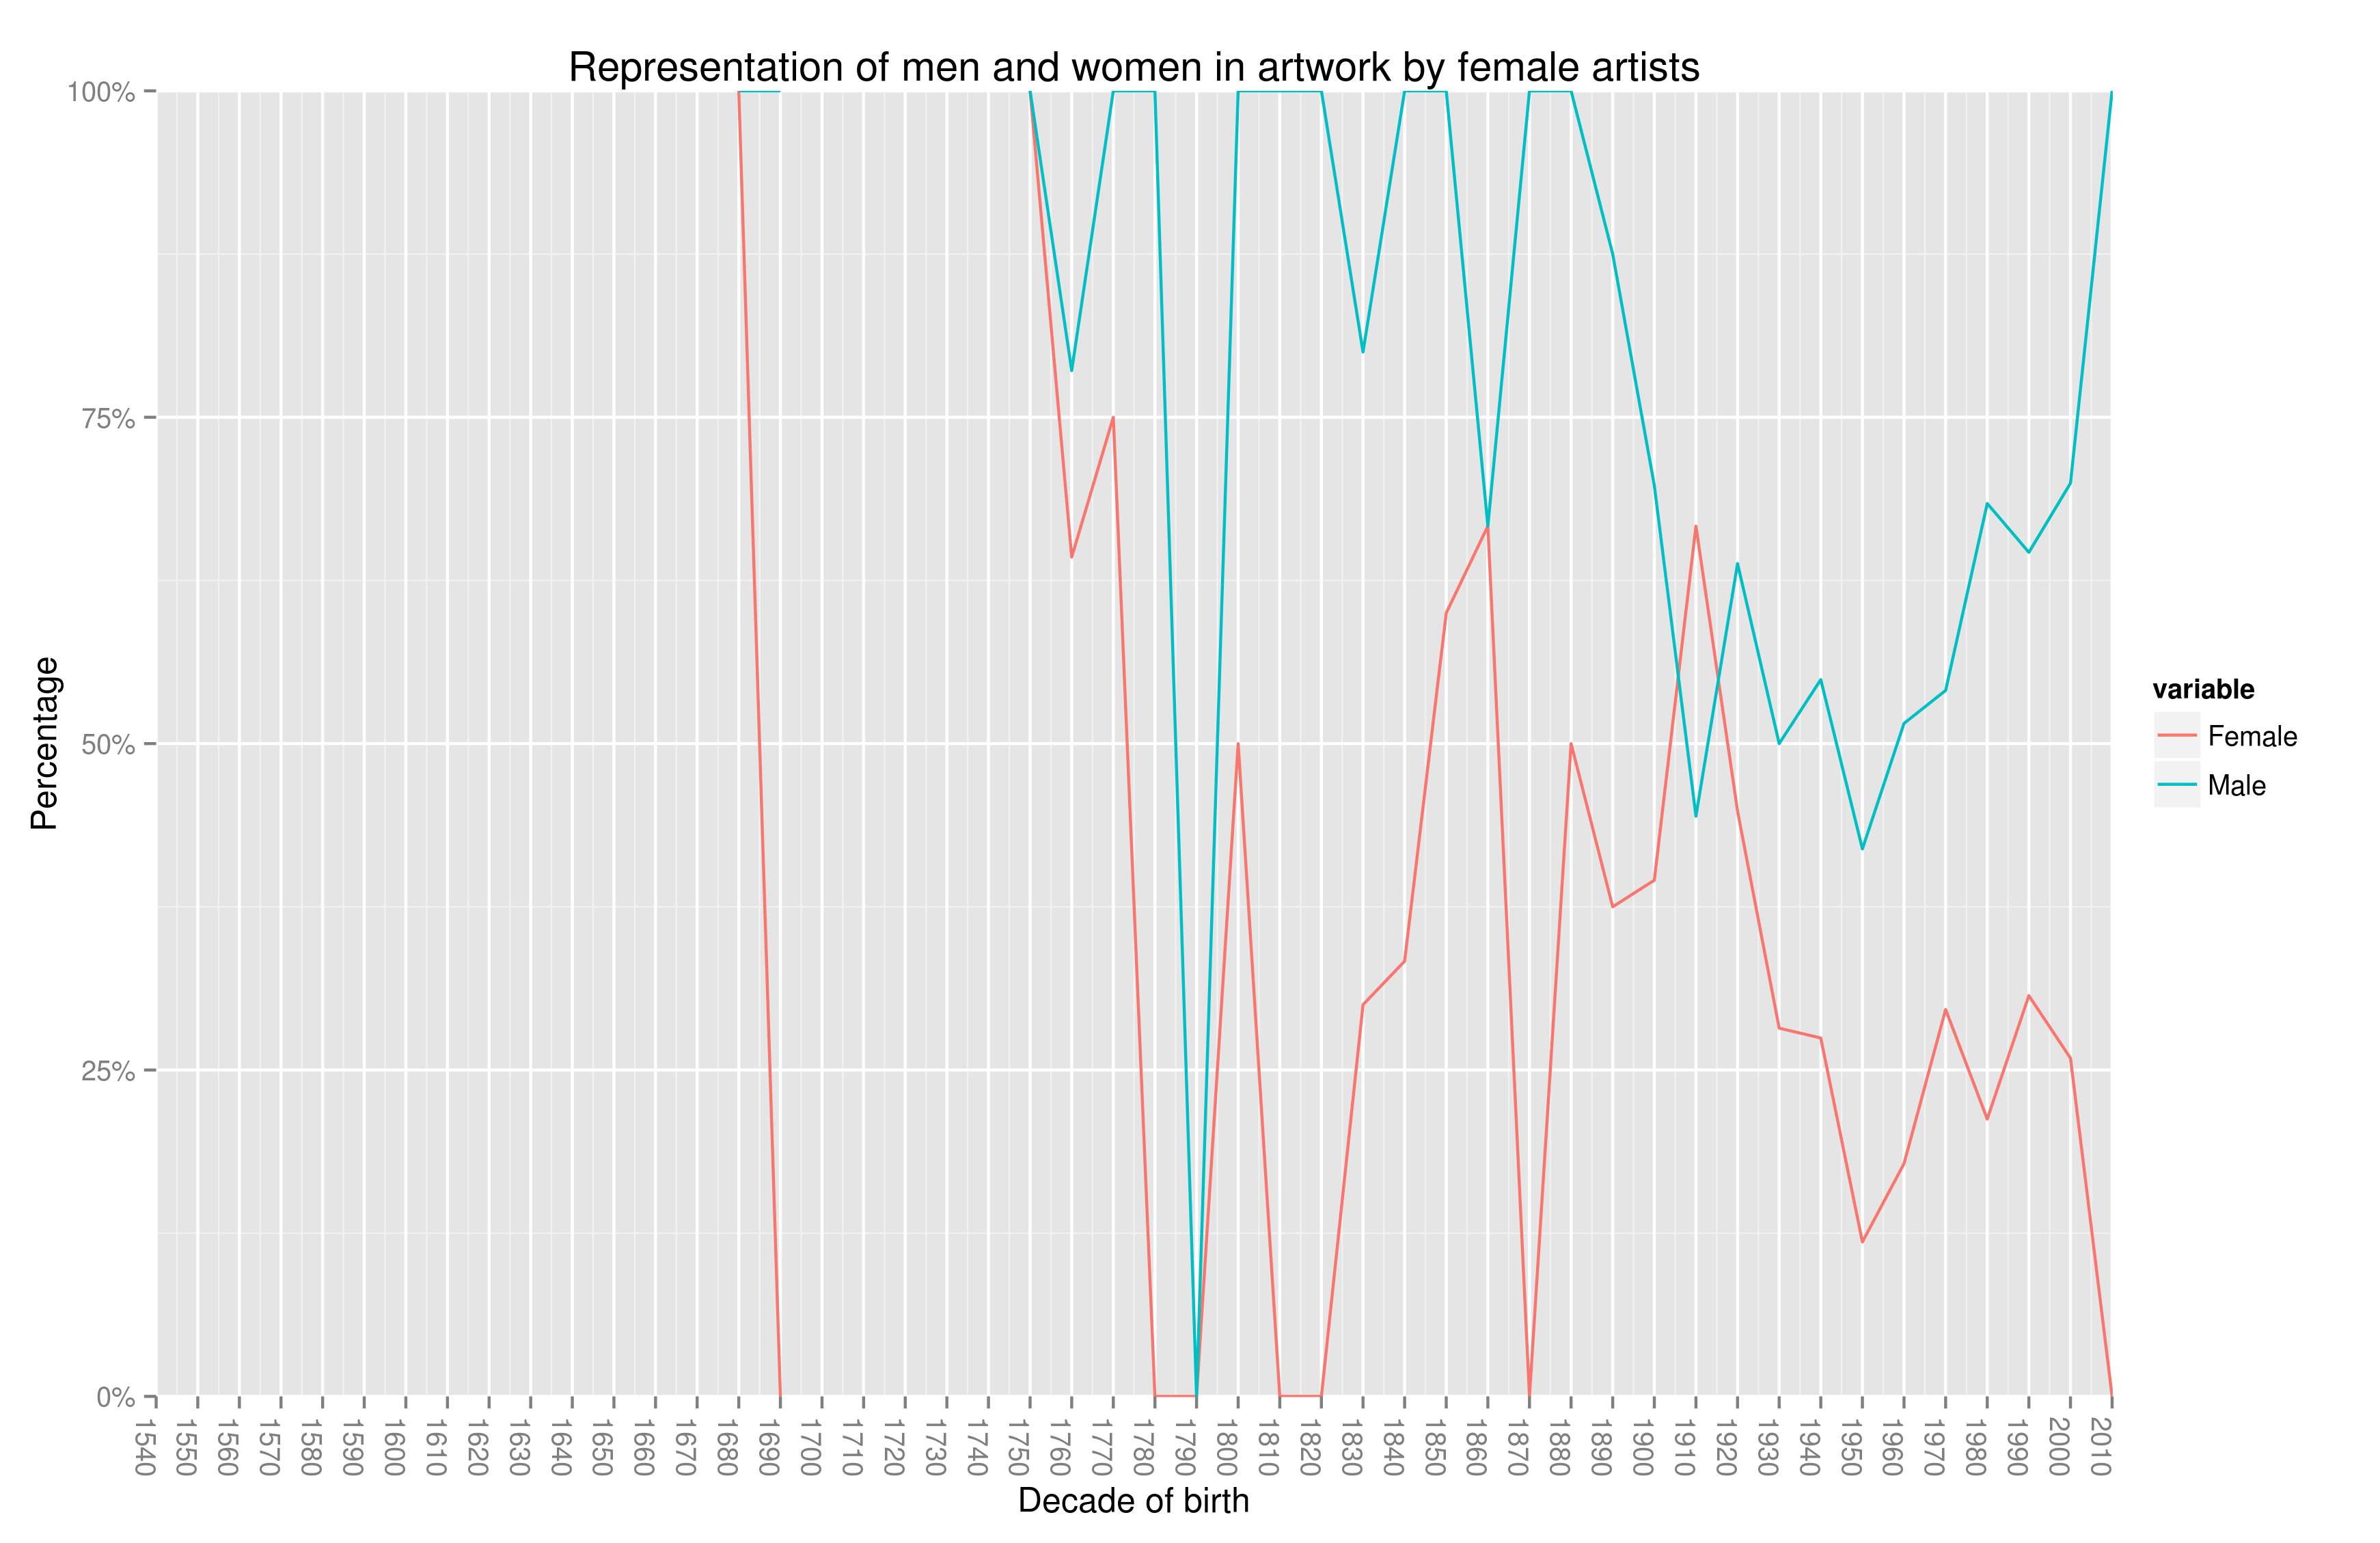 Representation of men and women in art by female artists